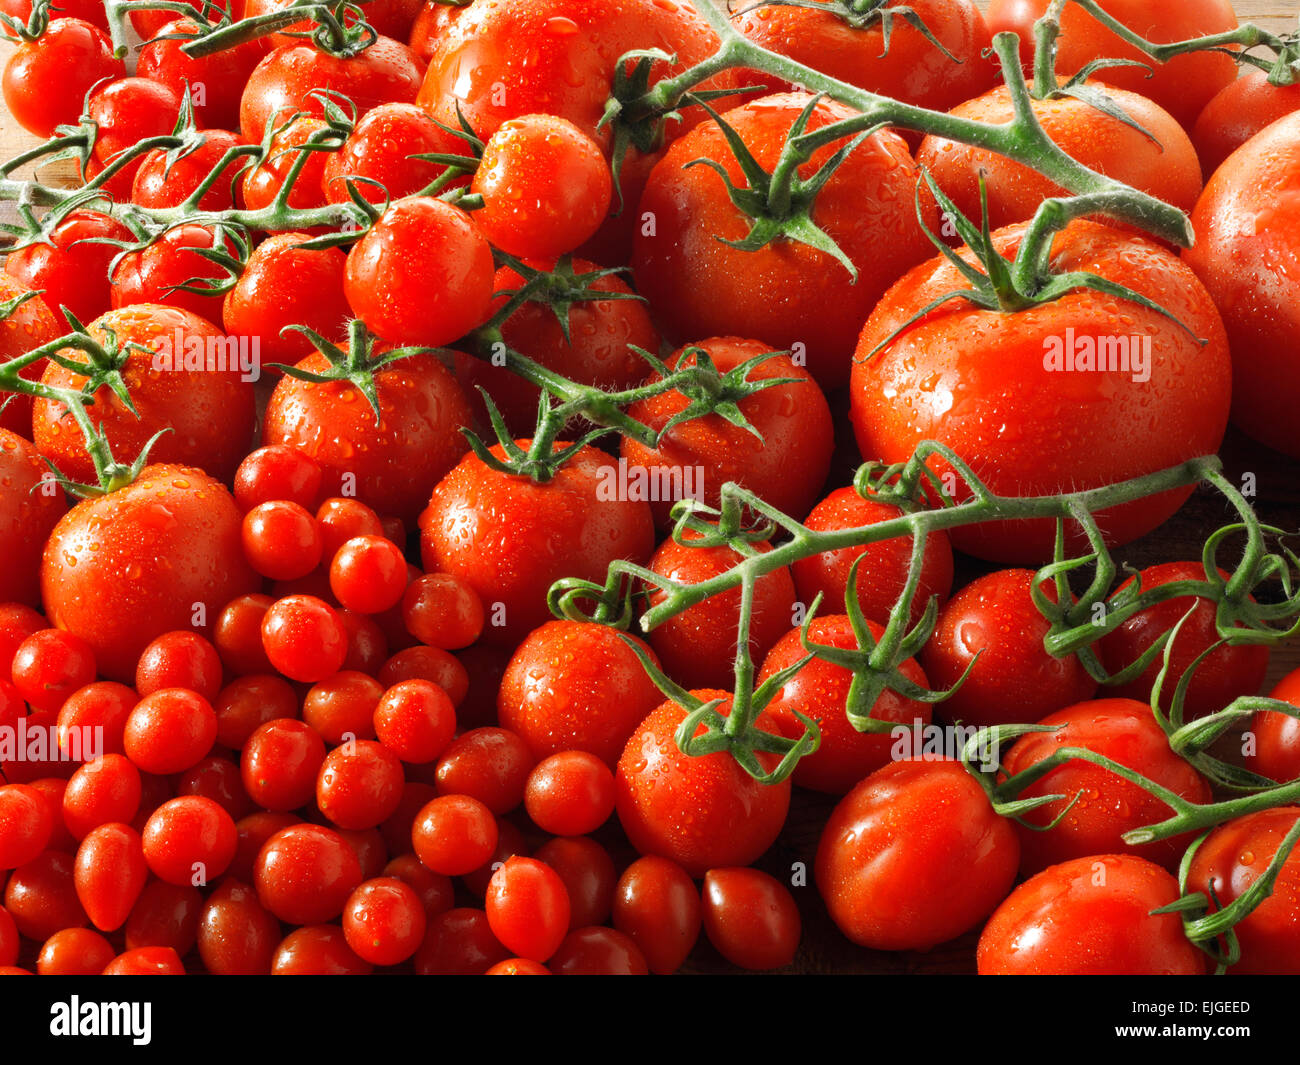 mixed fresh red whole tomatoes on the vine Stock Photo